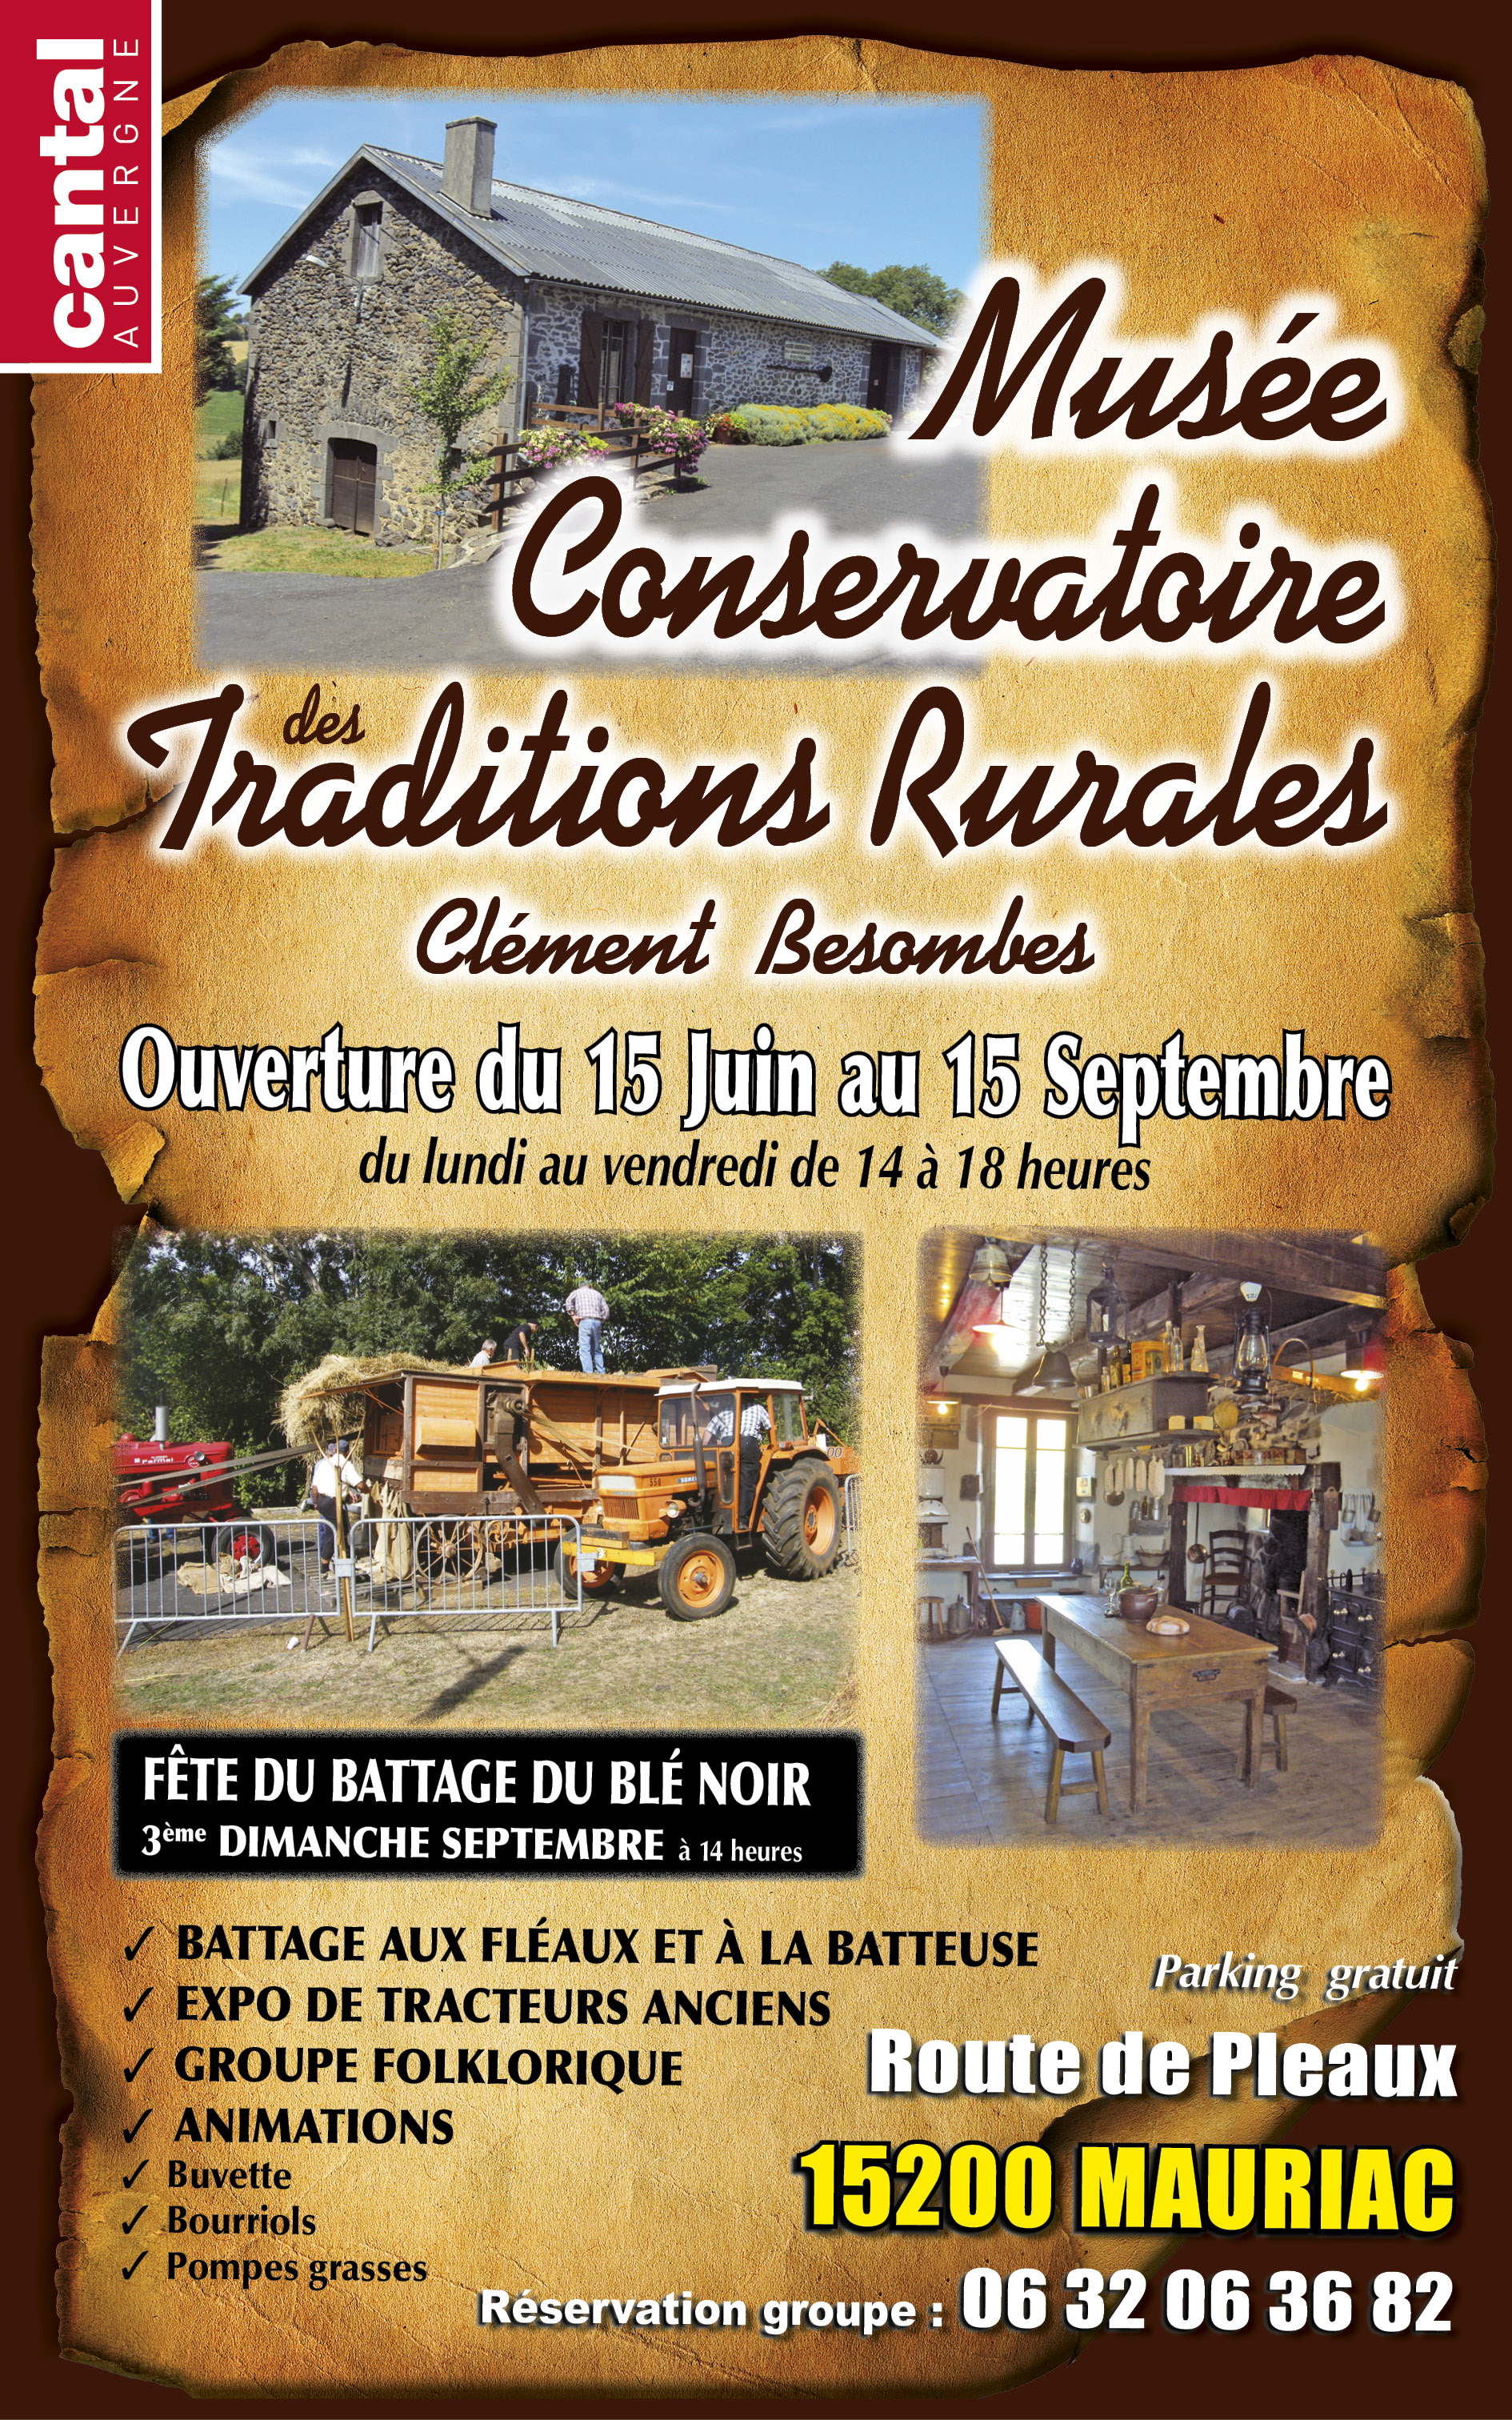 MCTR -2019 - Muse des Traditions Rurales Clment Besombes - Mauriac - Cantal